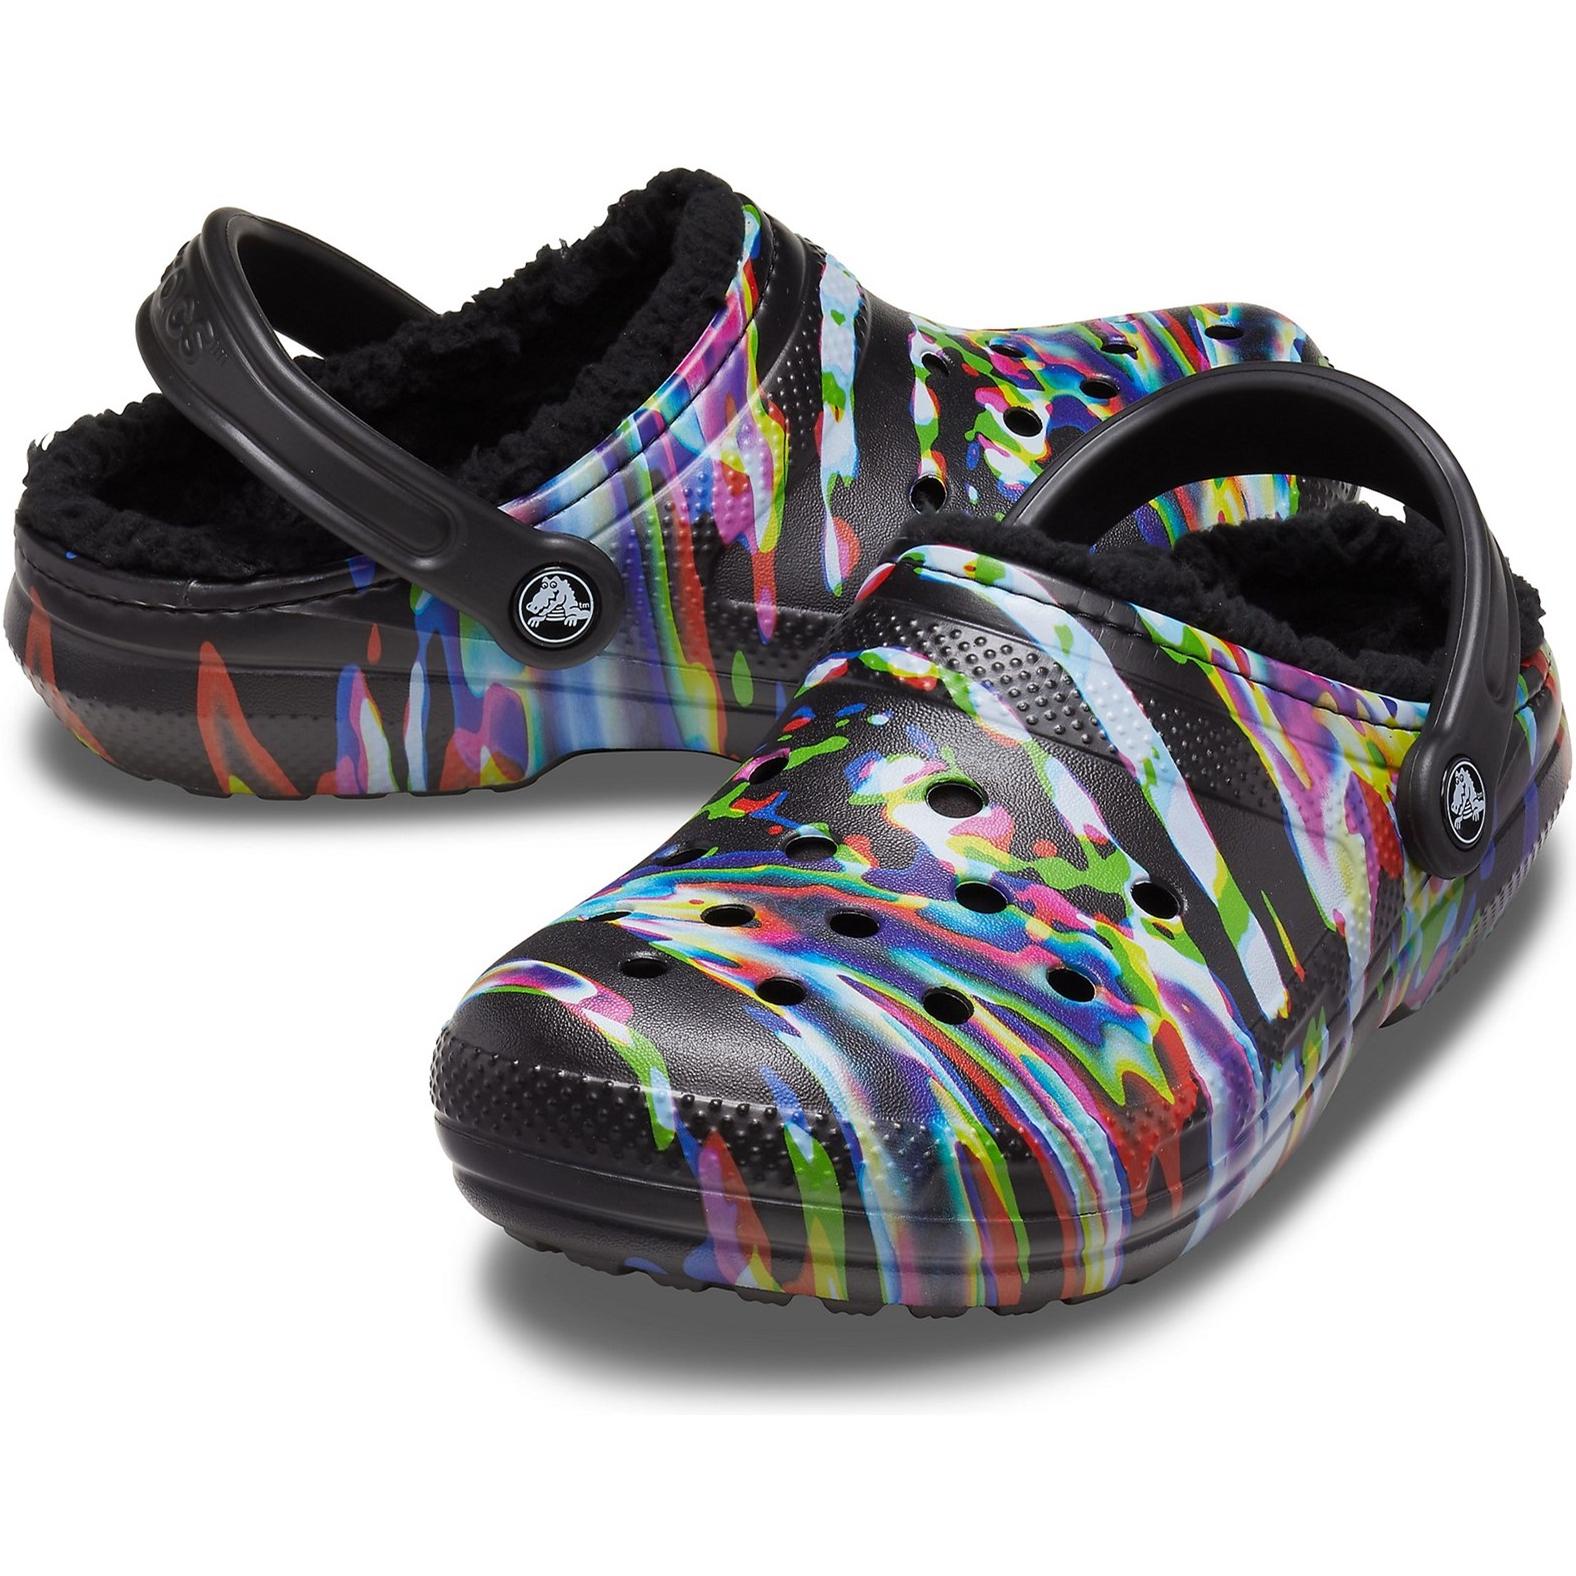 Crocs Classic Lined Out of this World Clog Sandals